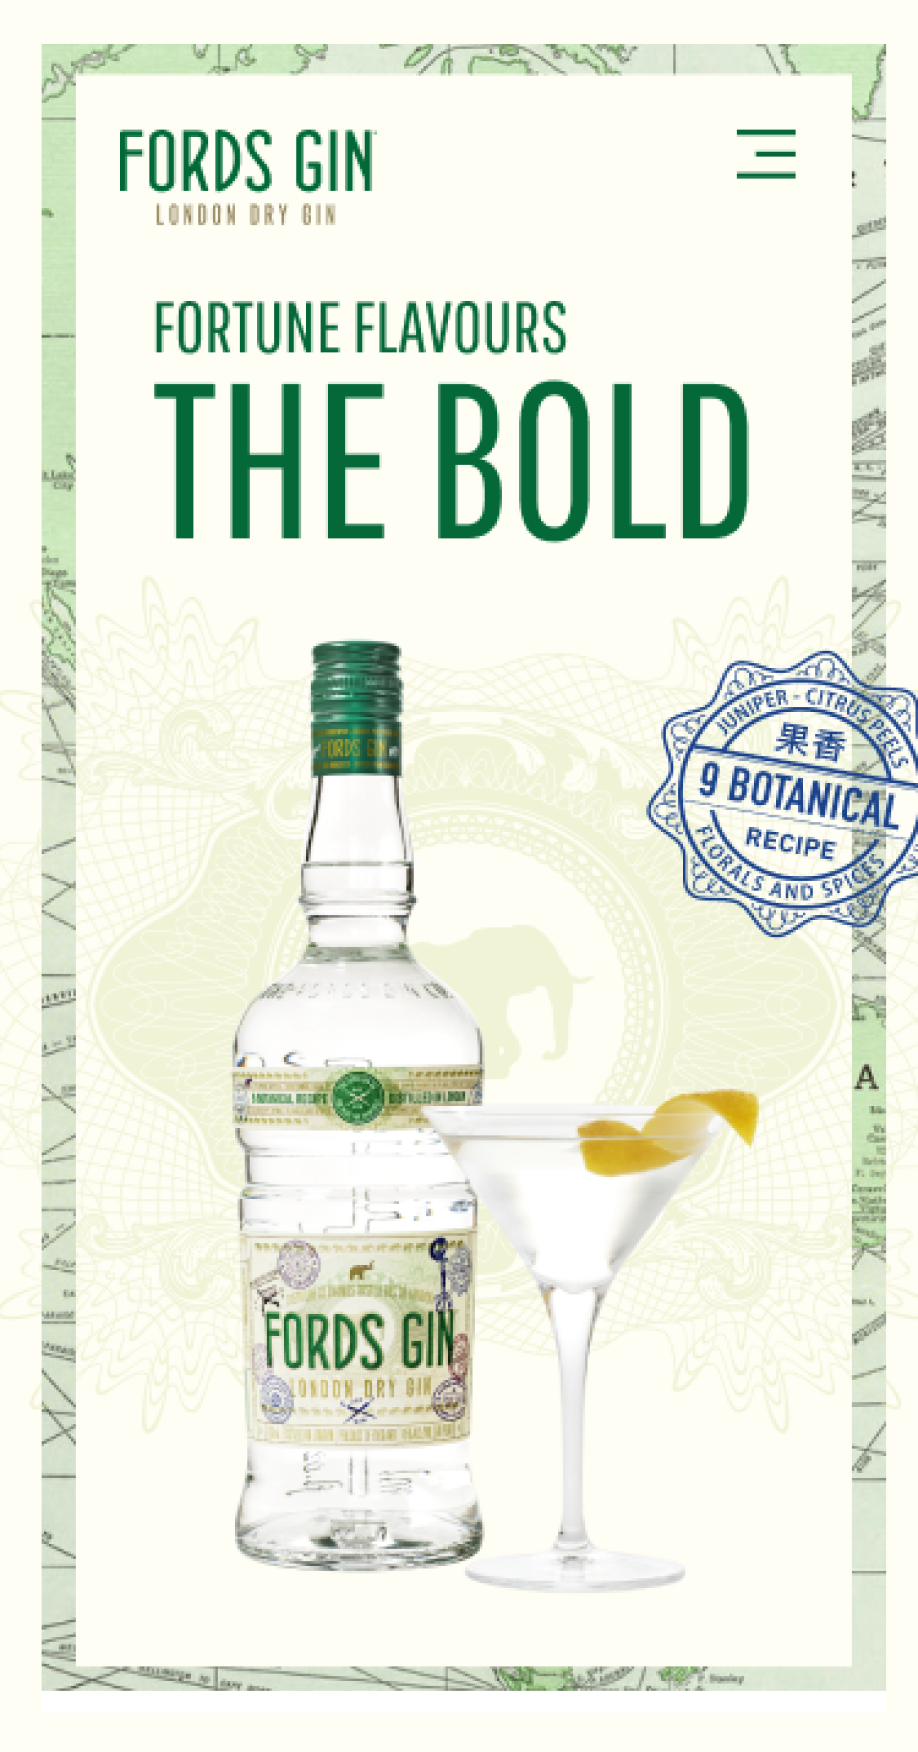 Mobile screengrab showing the Fords Gin bottle and martini on the Fords Gin website